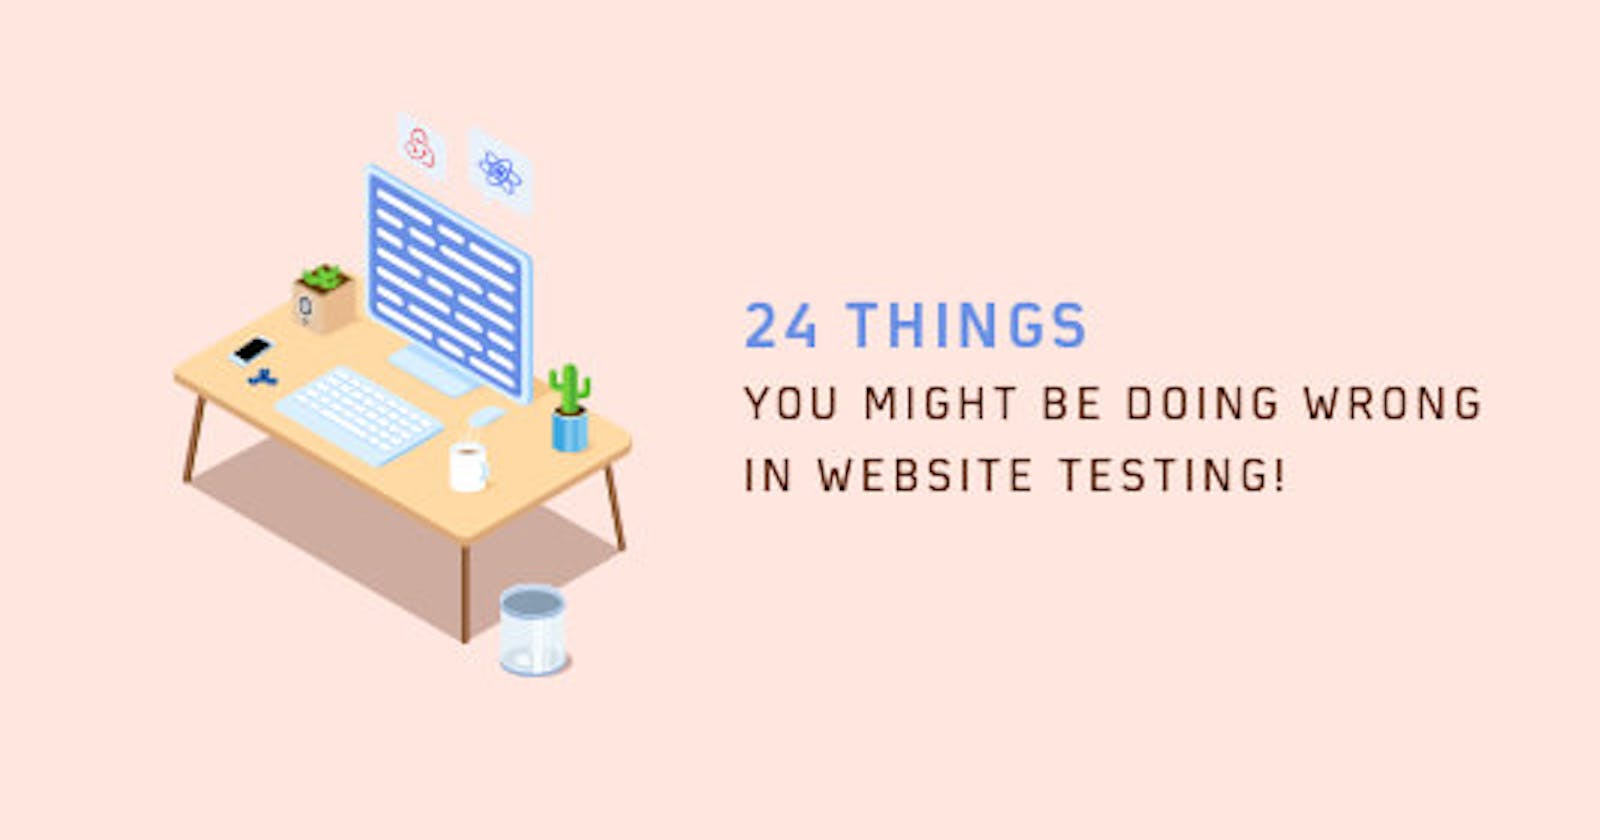 24 Things You Might Be Doing Wrong In Website Testing!